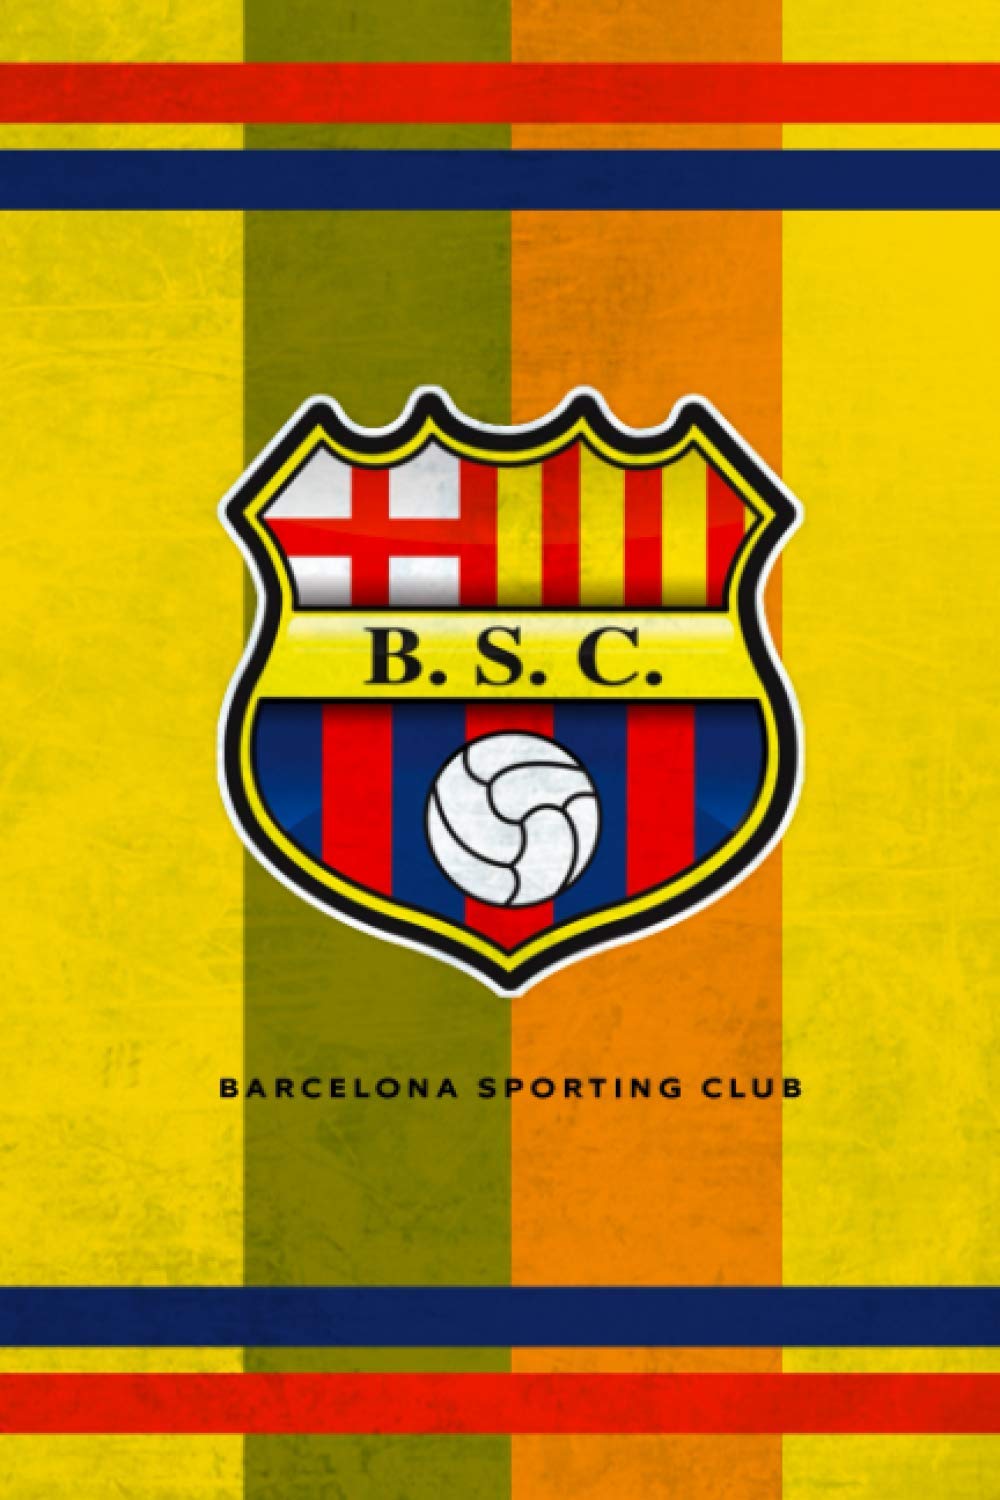 Barcelona Sporting Club: Barcelona S.C. Notebook / Football Club / Journal / Diary Gift, 110 Blank Pages, 6x9 inches, Matte Finish Cover: Publishing, Ynes Gifts: 9798559793795: Books